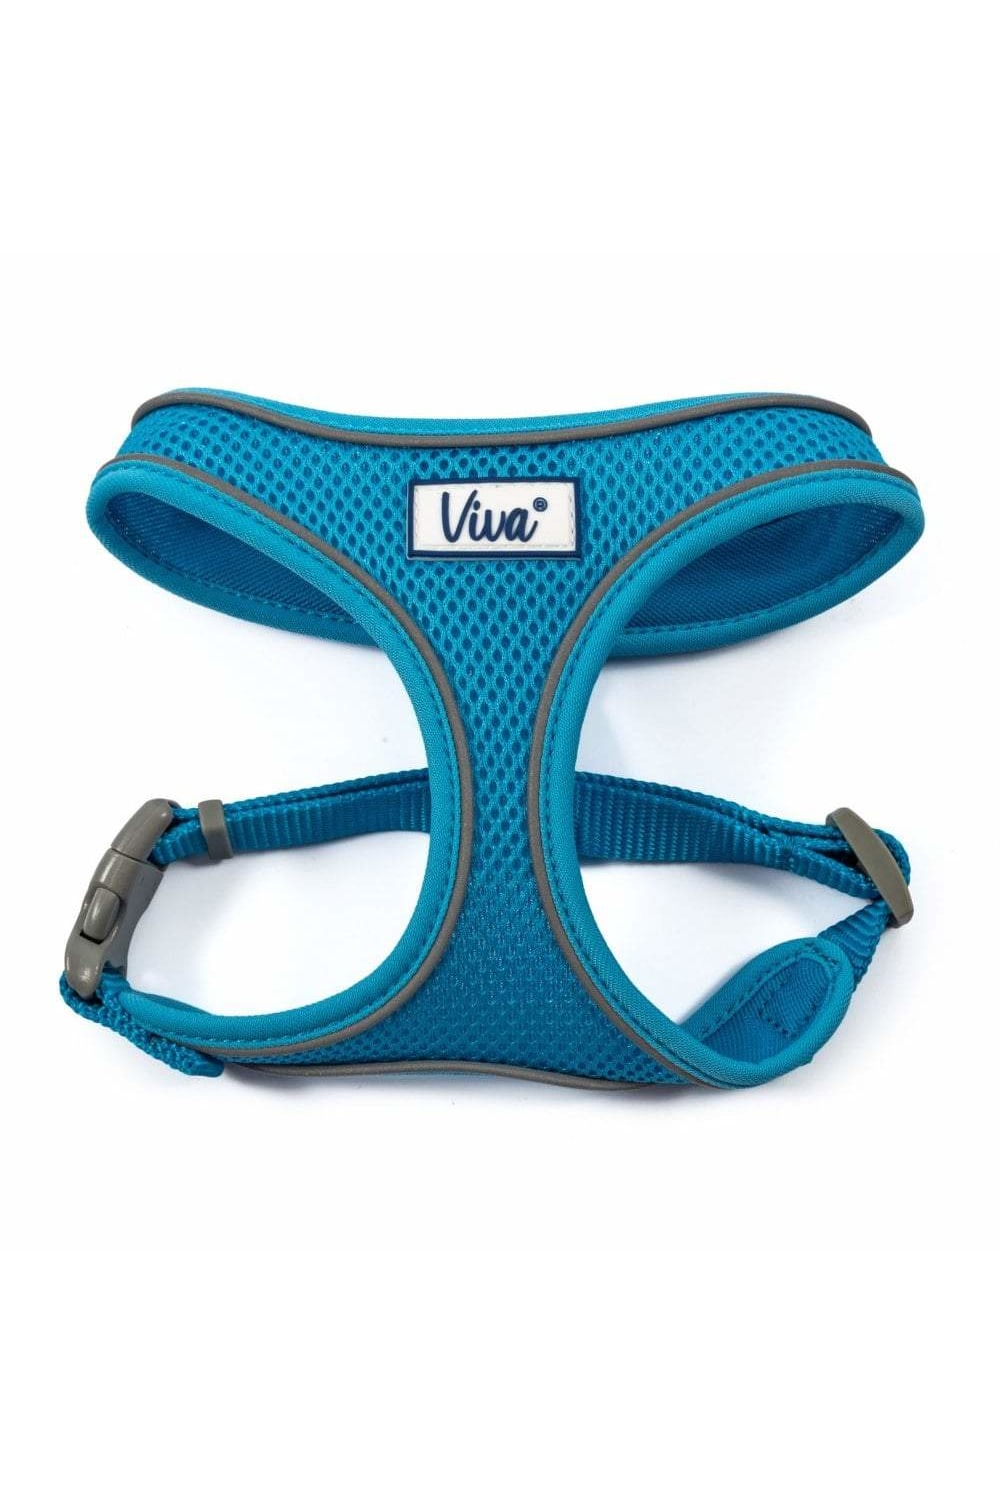 Ancol Comfort Mesh Dog Harness (Blue) (17.32in - 22.44in)